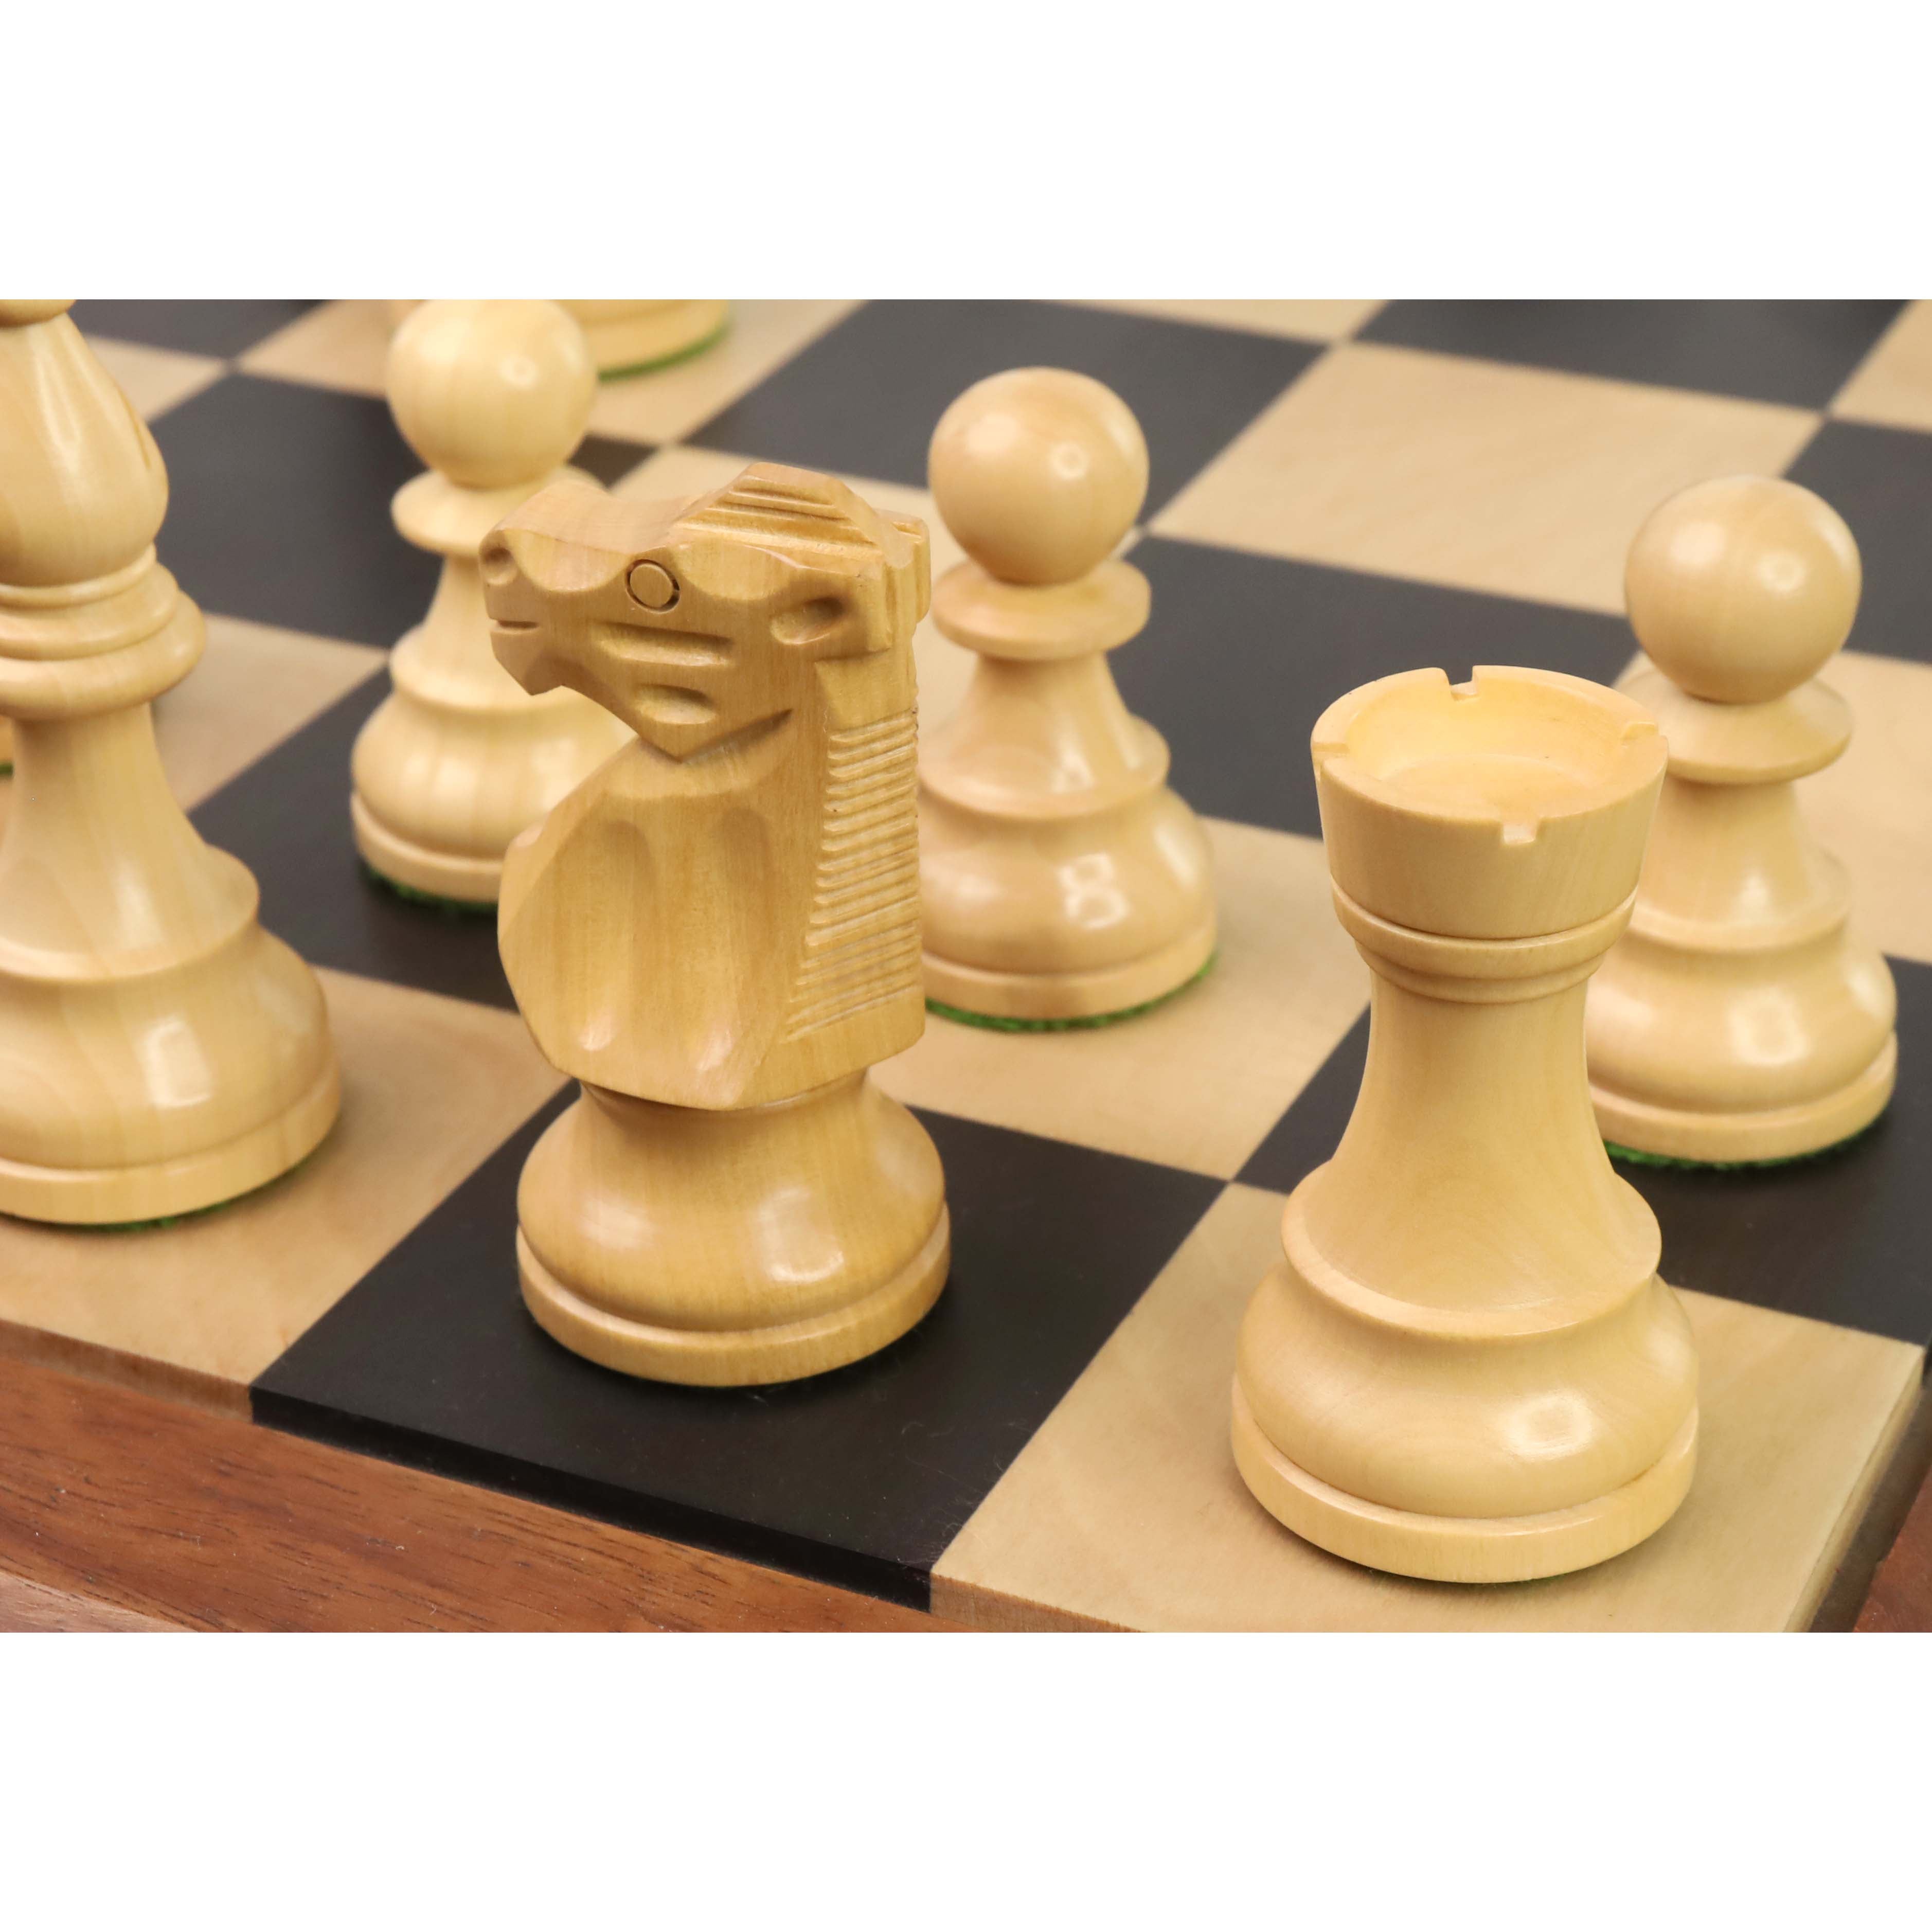 Reproduced French Lardy Staunton Chess Set- Chess Pieces Only - Weighted Wood - 4 Queens